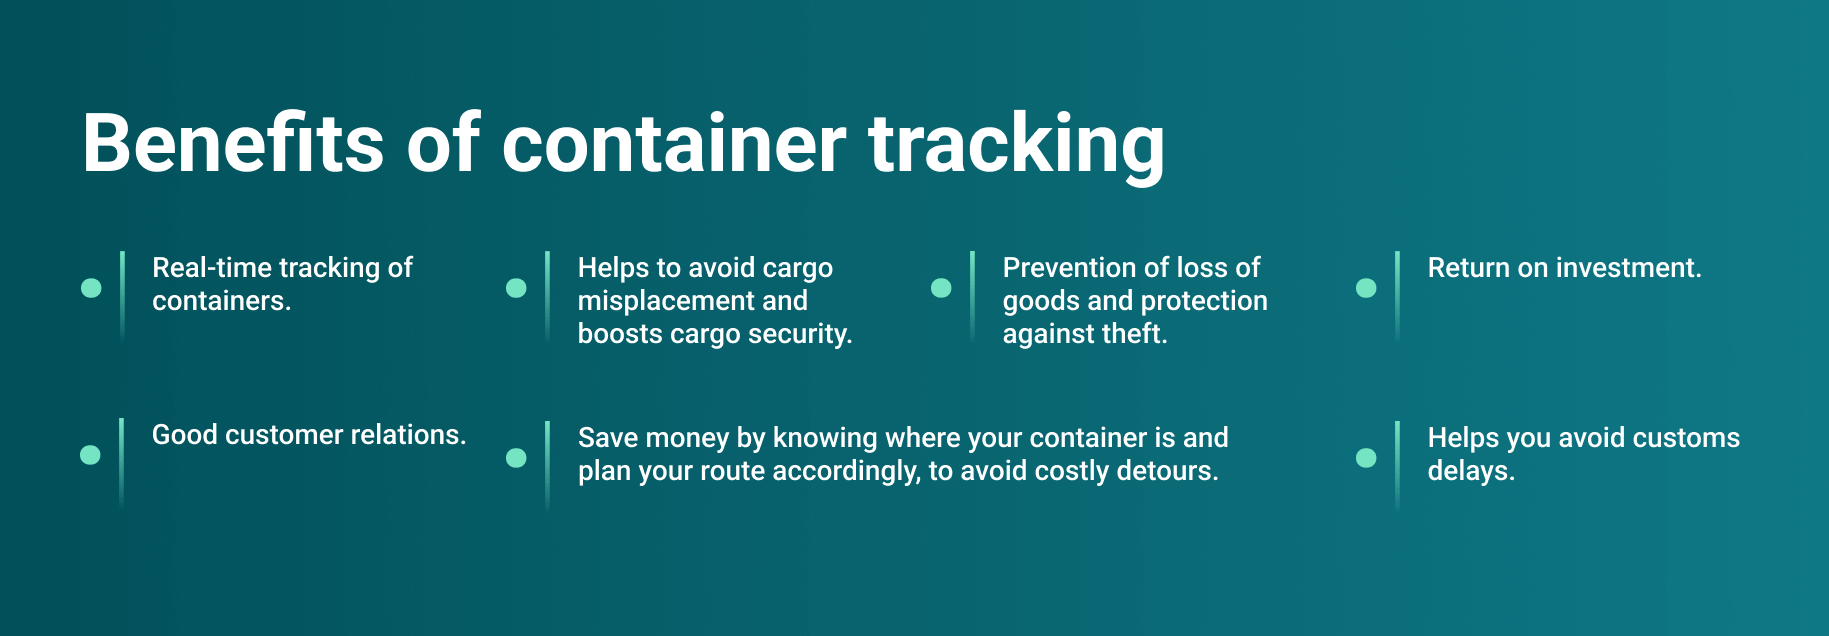 benefits of container tracking